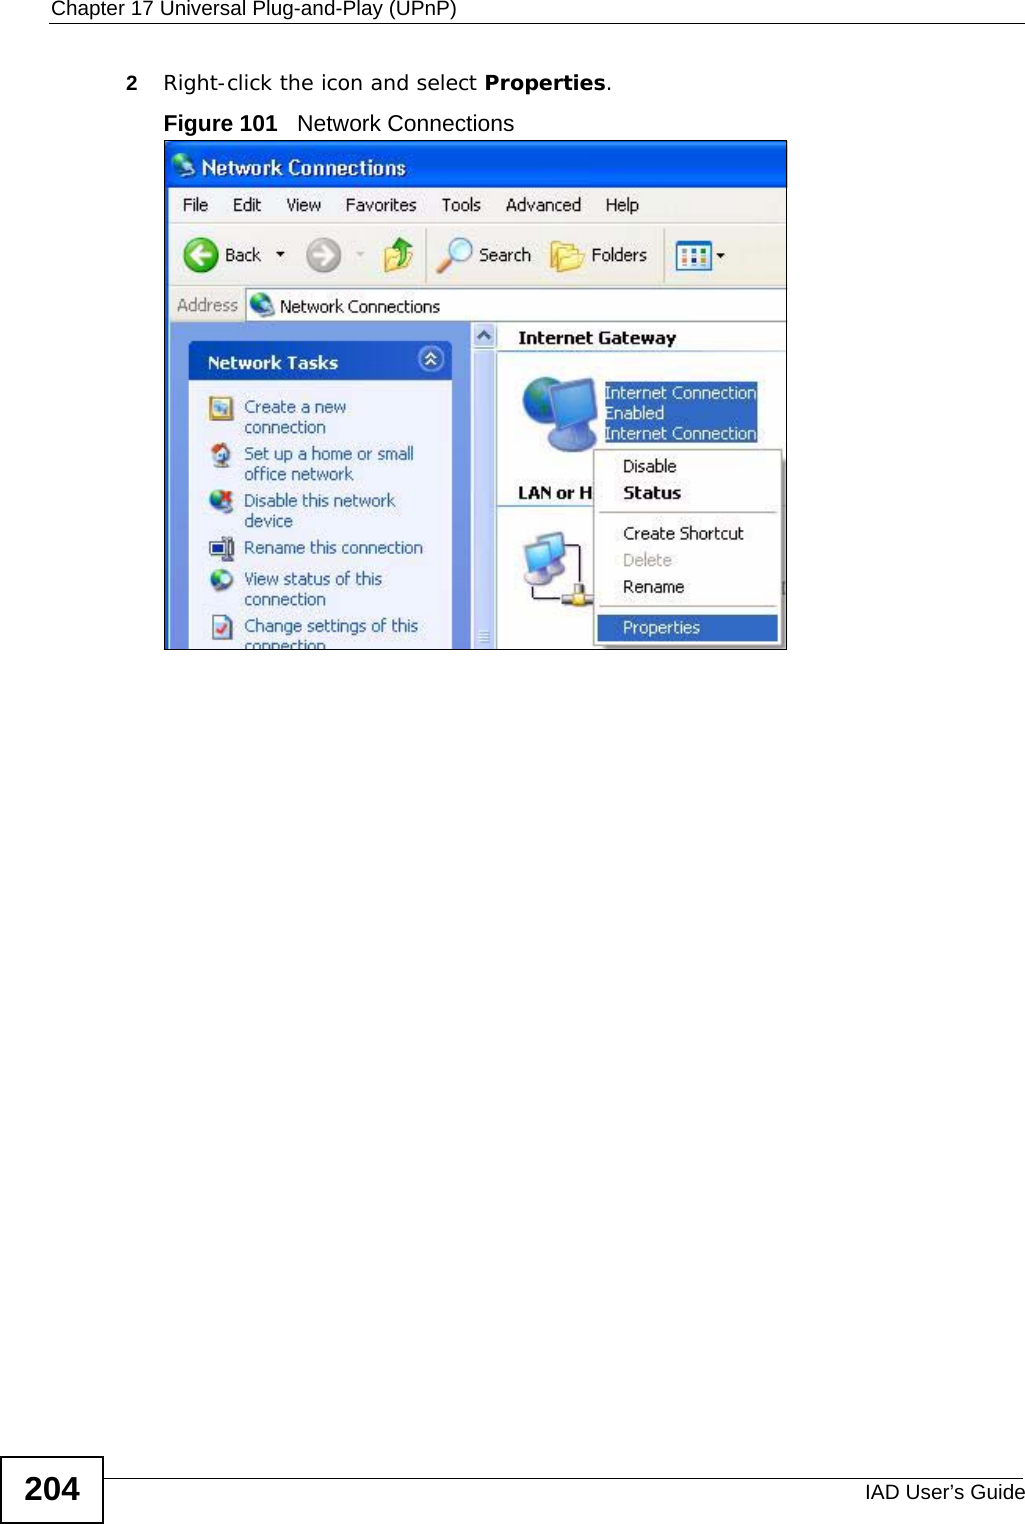 Chapter 17 Universal Plug-and-Play (UPnP)IAD User’s Guide2042Right-click the icon and select Properties. Figure 101   Network Connections